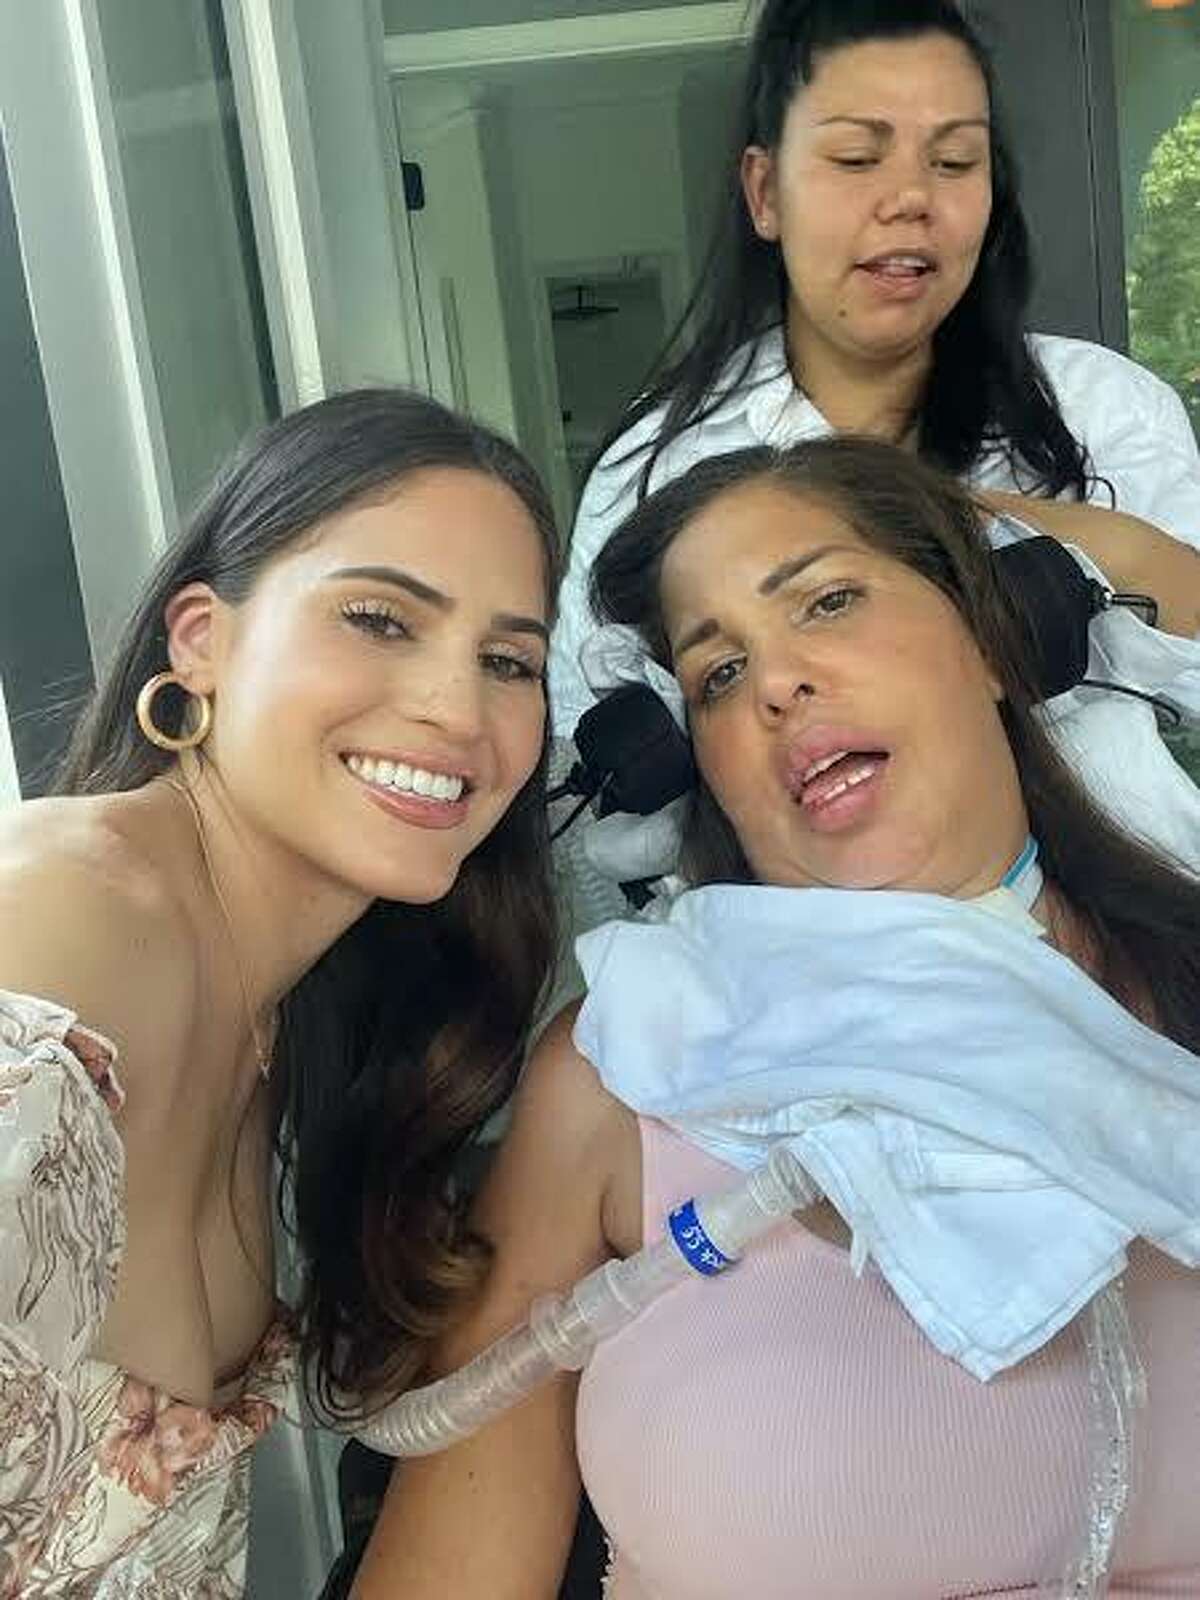 Lluvia Alzate is competing in the Miss Texas USA pageant to raise awareness for ALS, a neurological disease her mother was diagnosed with in 2019.